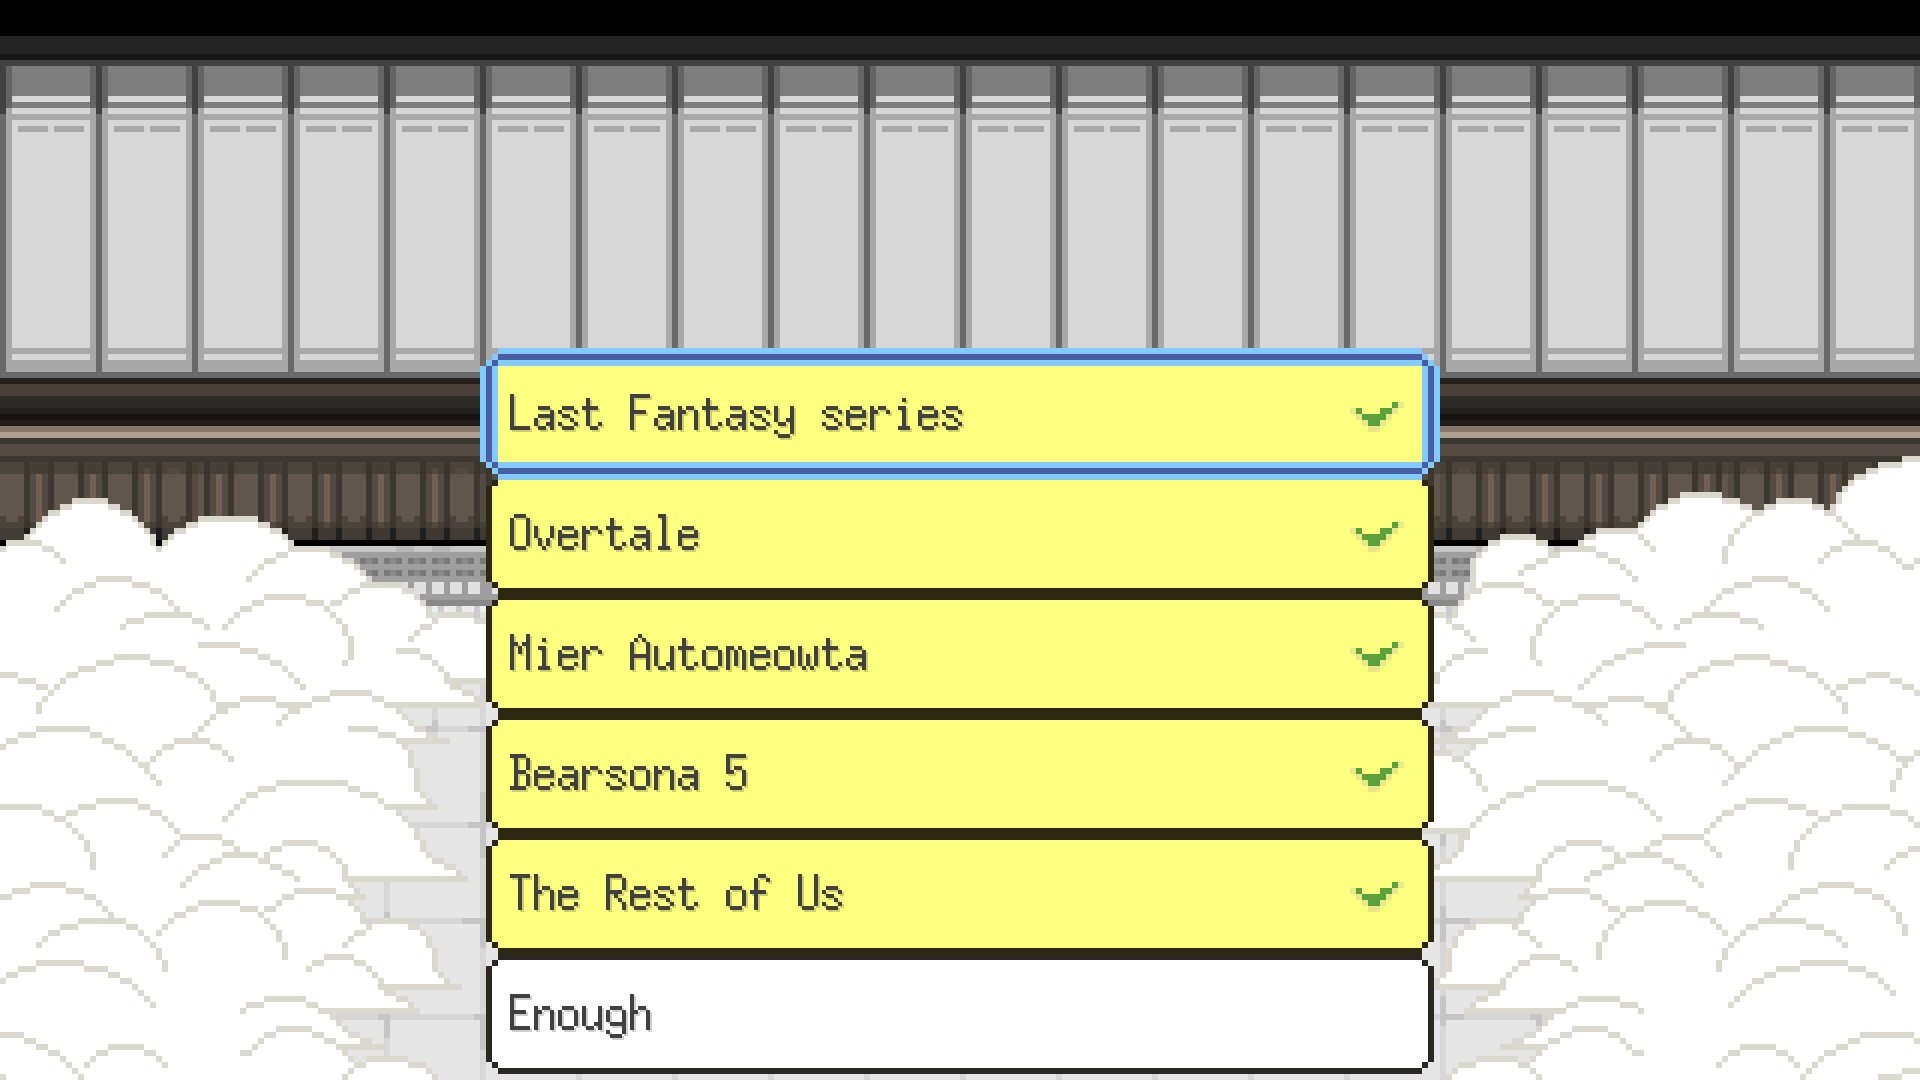 A screenshot from Bear's Restaurant showing several dialogue options parodying popular games. The titles listed are Last Fantasy series, Overtale, Mier Automeowta, Bearsona 5, and The Rest of Us. The final button below them says the word Enough.